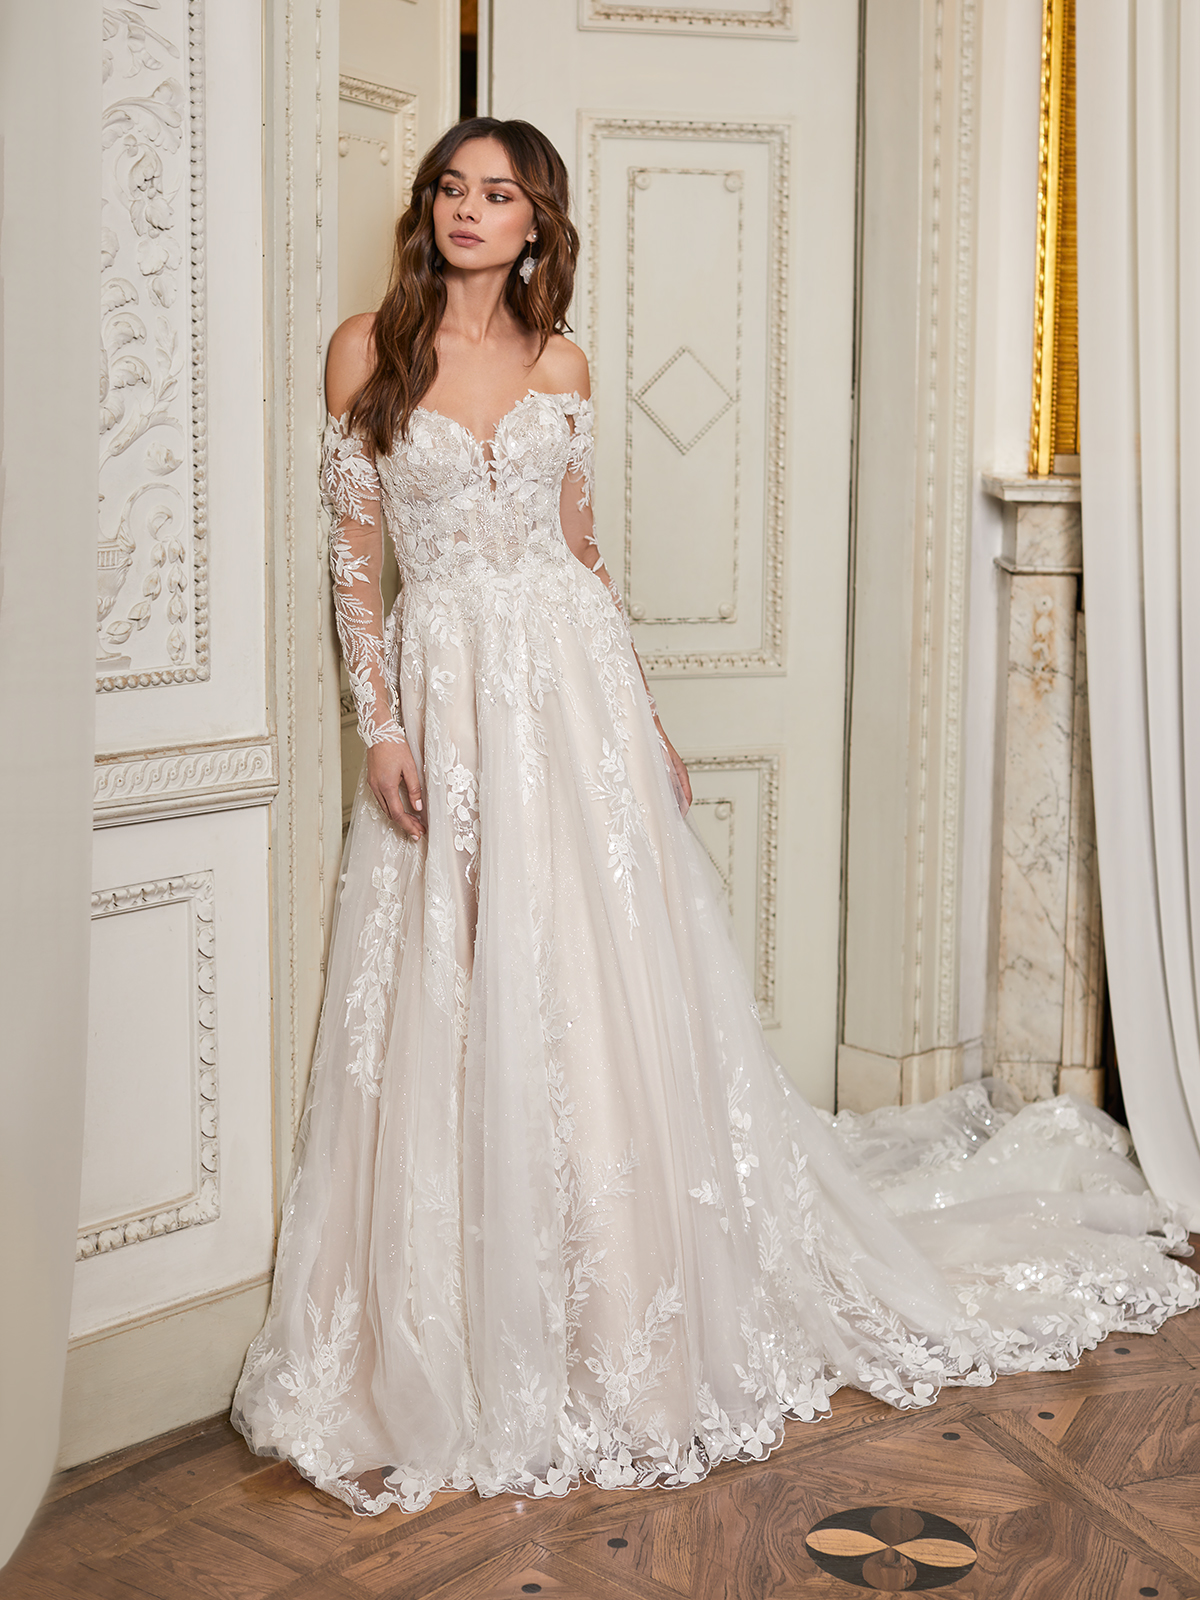 32 Winter Wedding Dresses Perfect for cold day | Long sleeve dresses